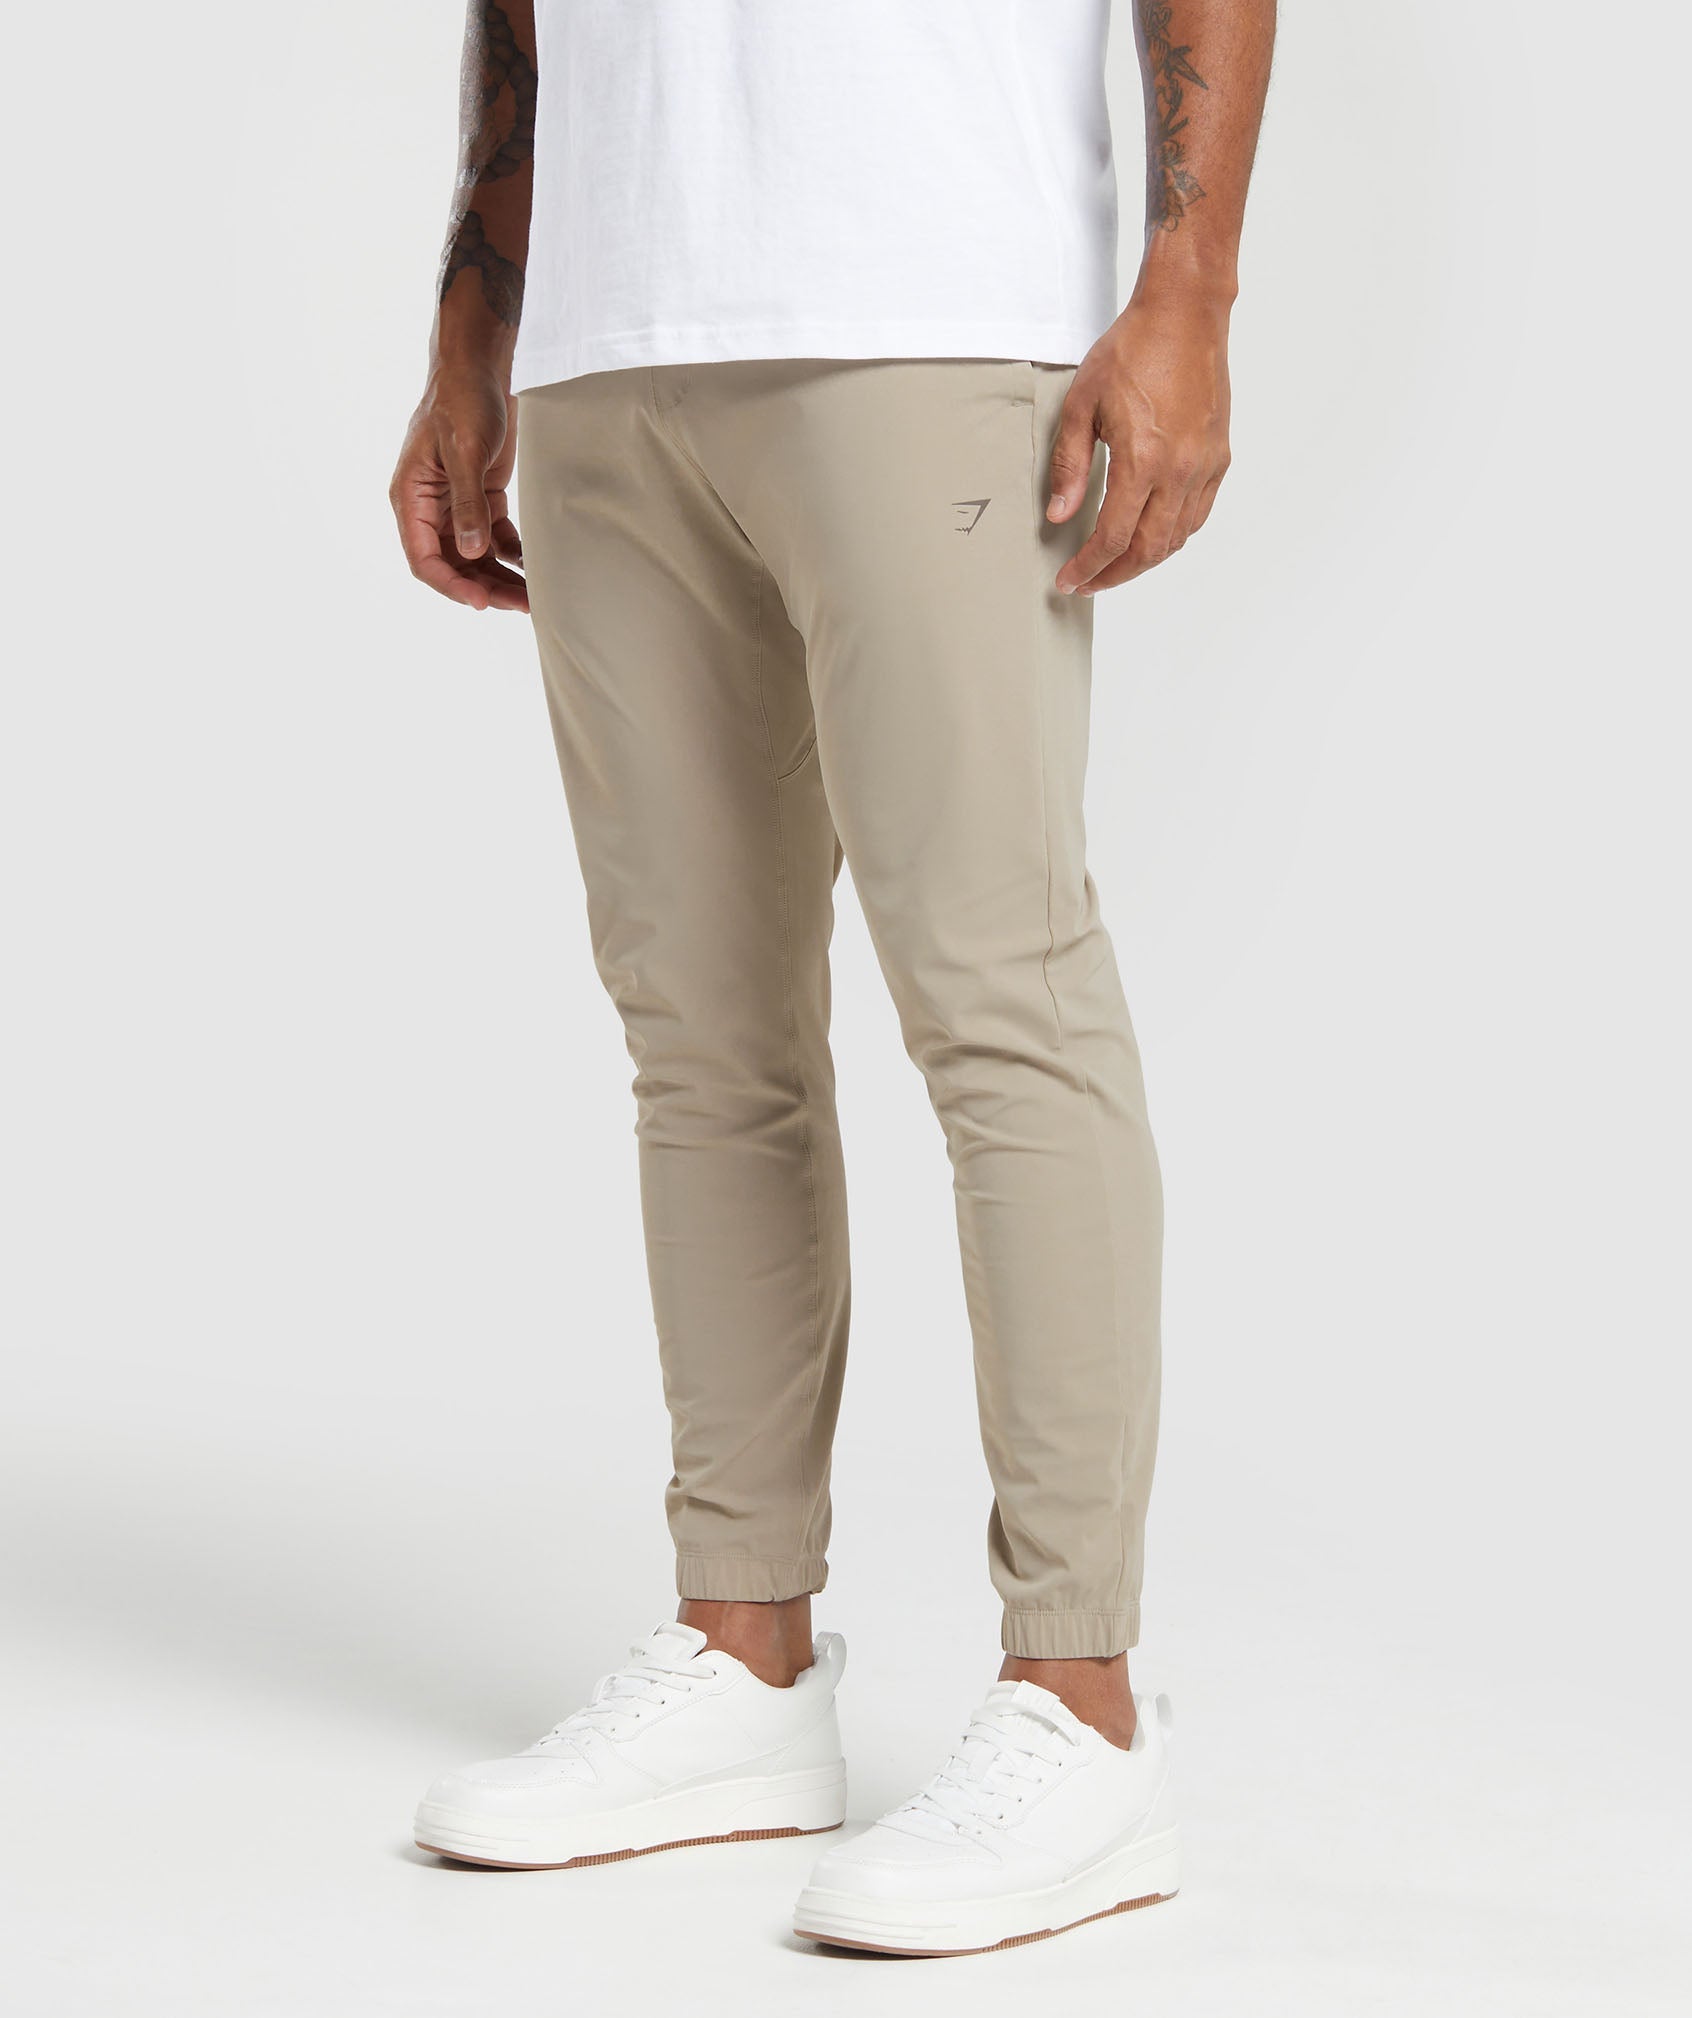 Studio Joggers in Sand Brown - view 4